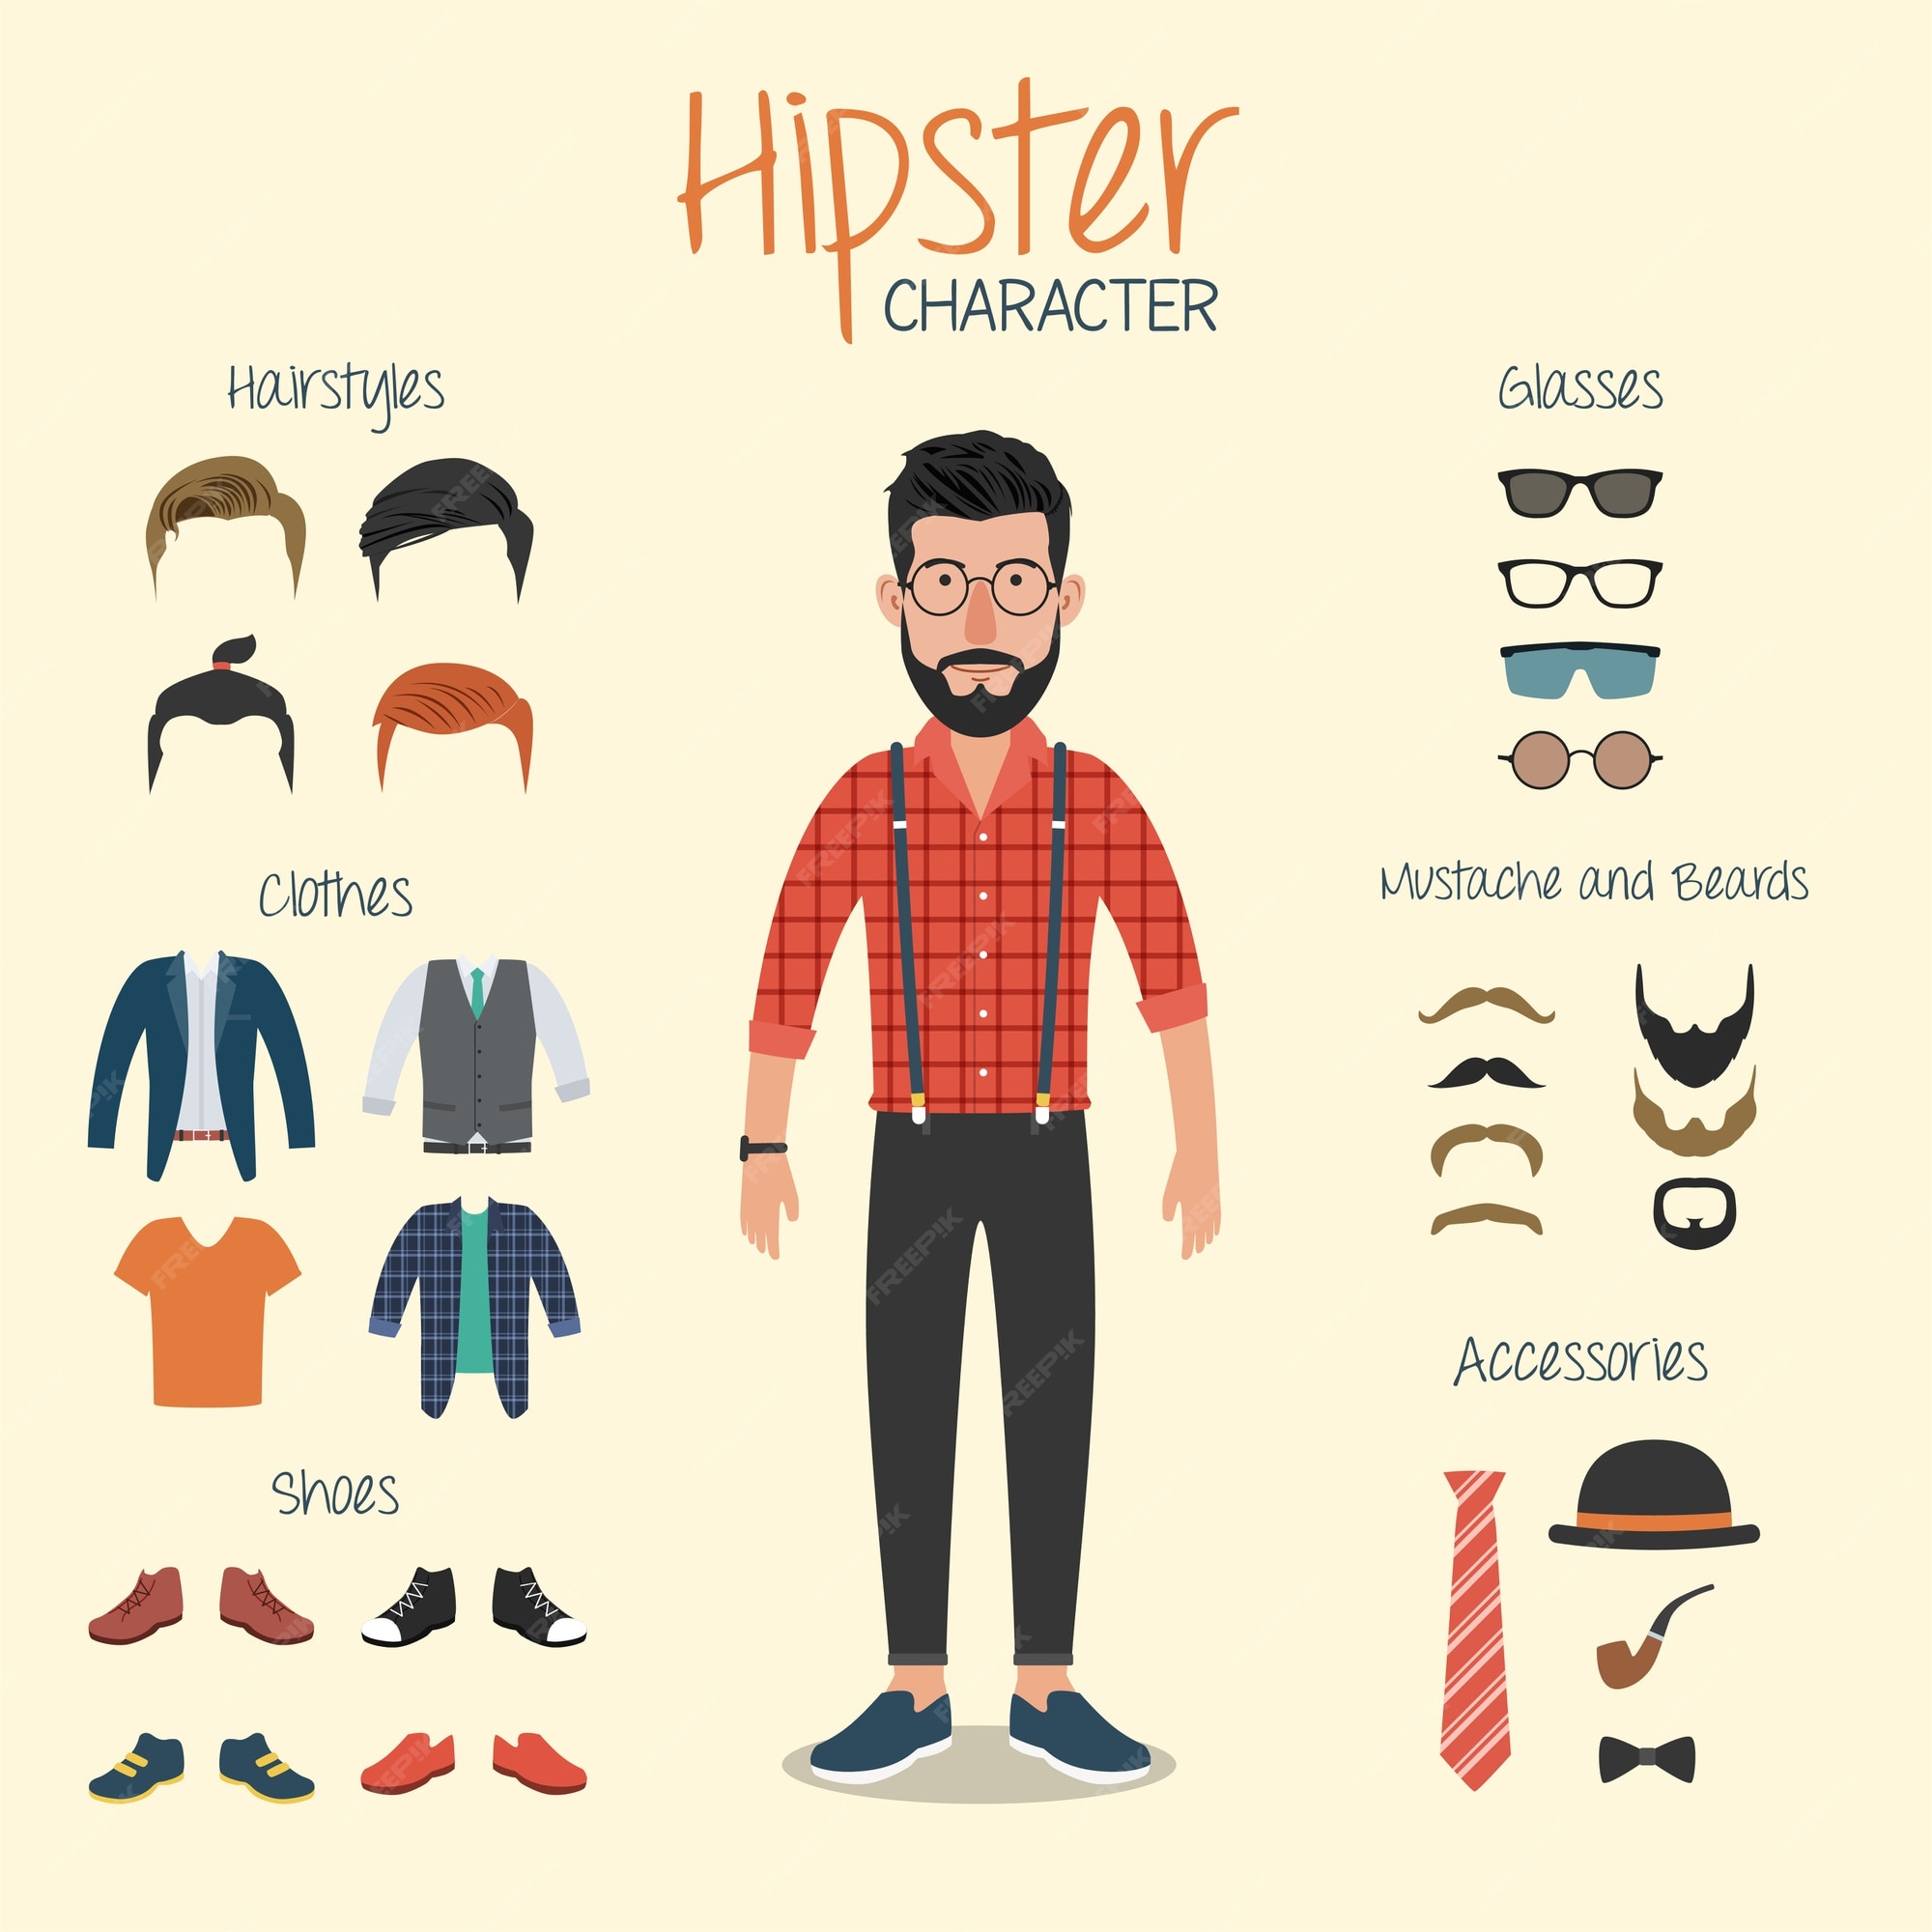 hipster-character-with-hipster-elements_7547-1.jpg